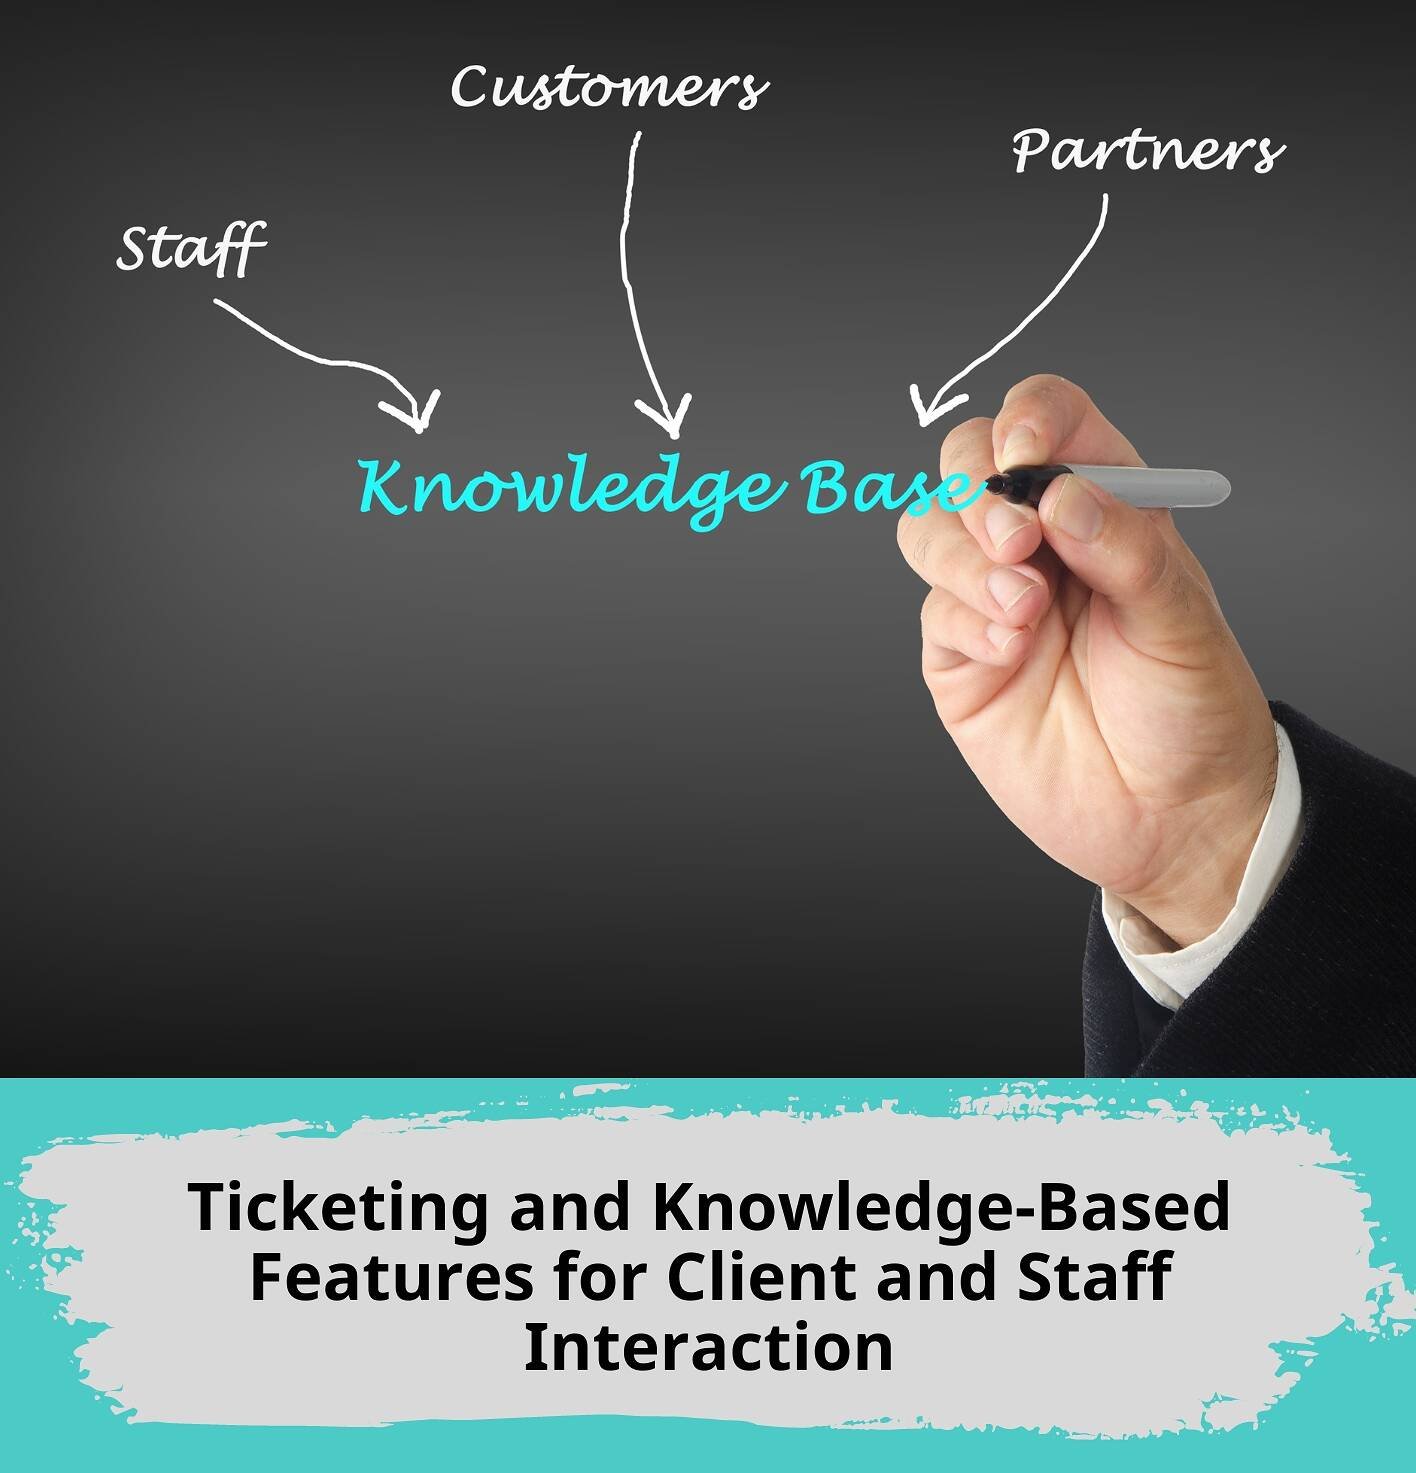 Ticketing and Knowledge-Based Features for Client and Staff Interaction